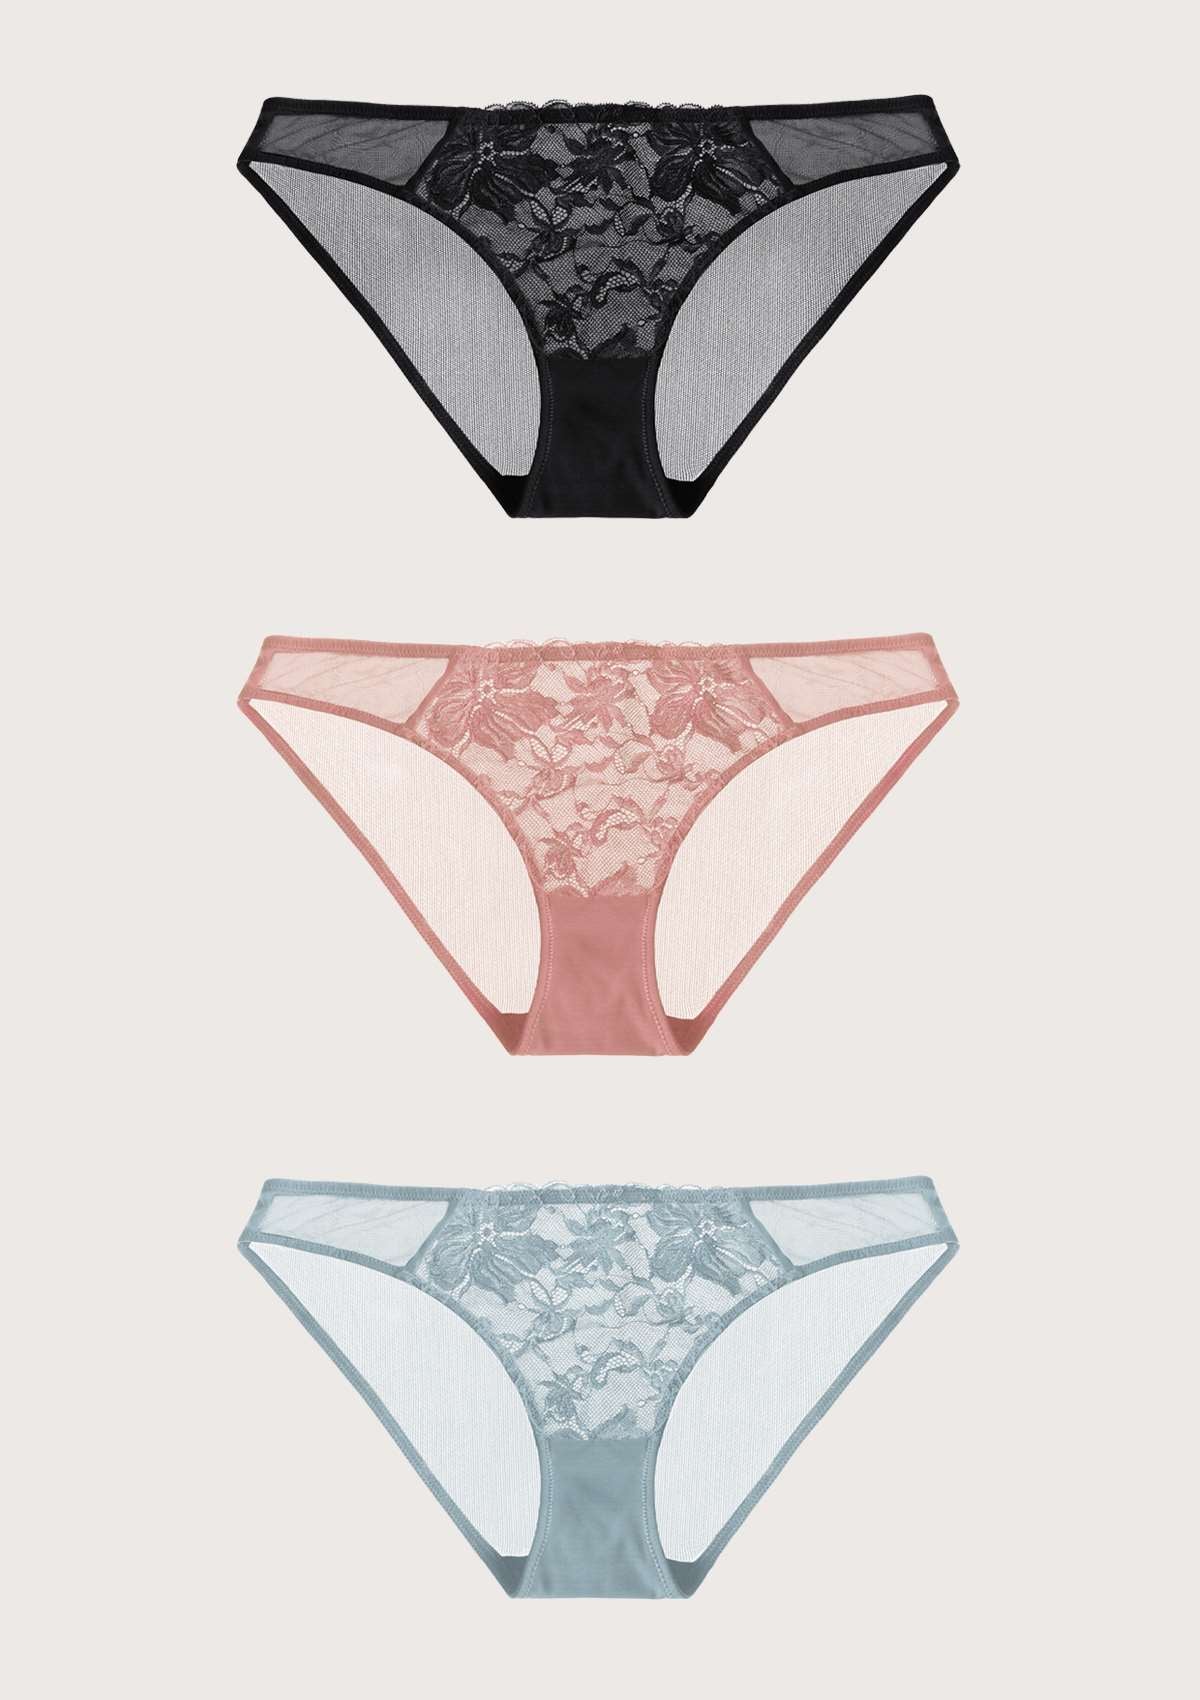 HSIA Pretty In Petals Breathable Sexy Lace Bikini Underwears 3 Pack - M / Black+Light Coral+Pewter Blue